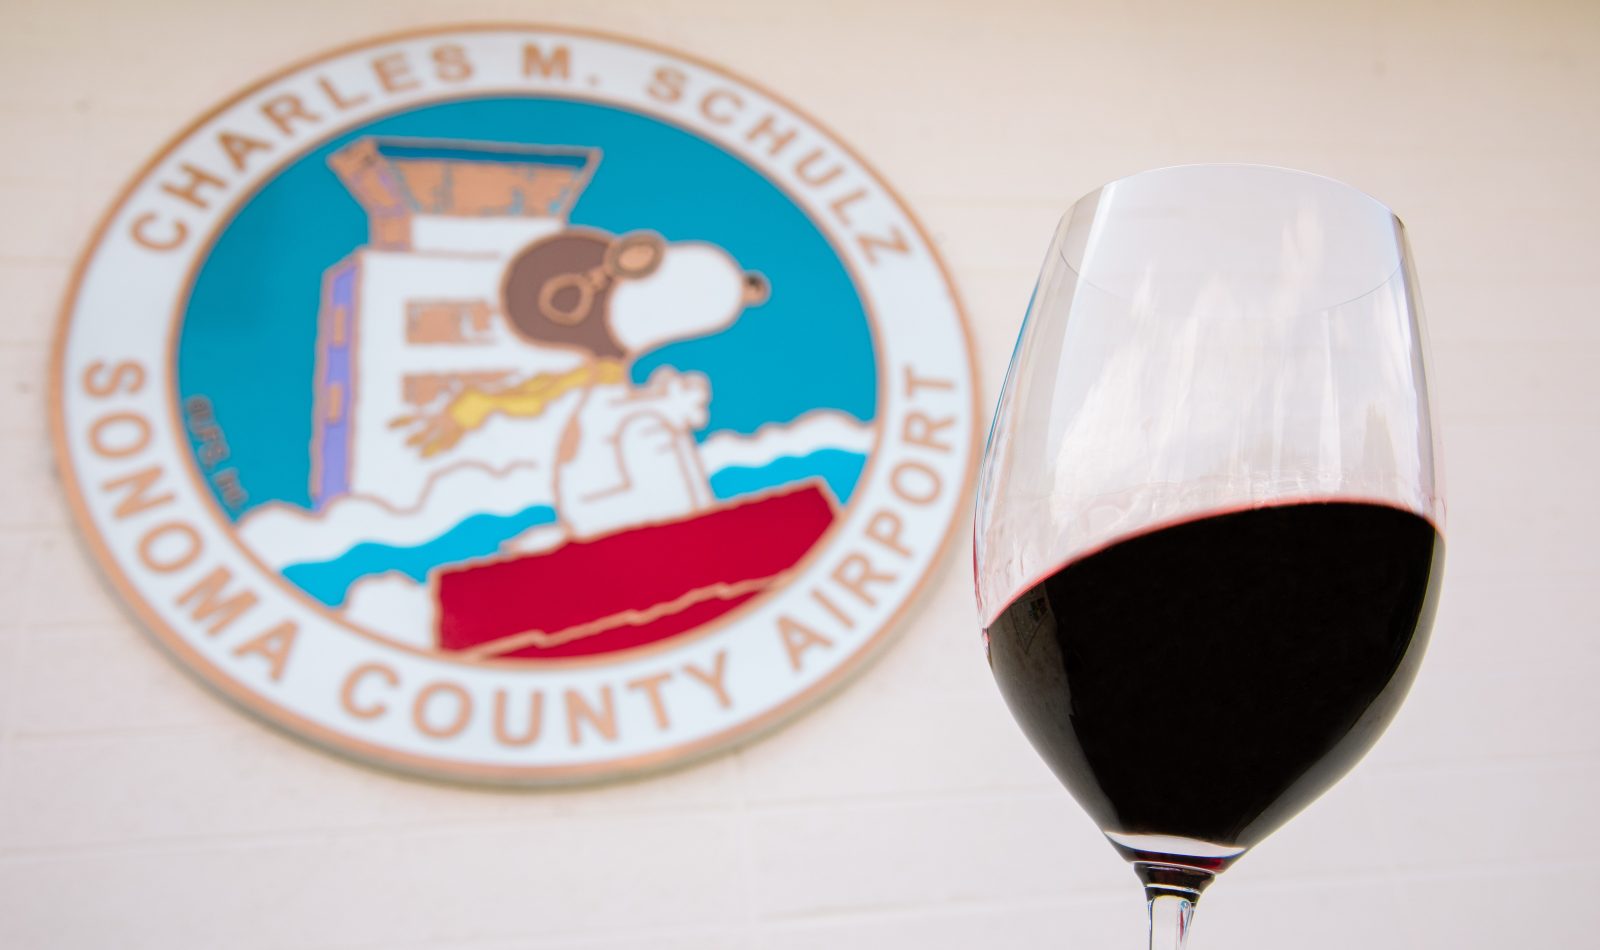 sign for Santa Rosa airport with a glass of red wine in the foreground